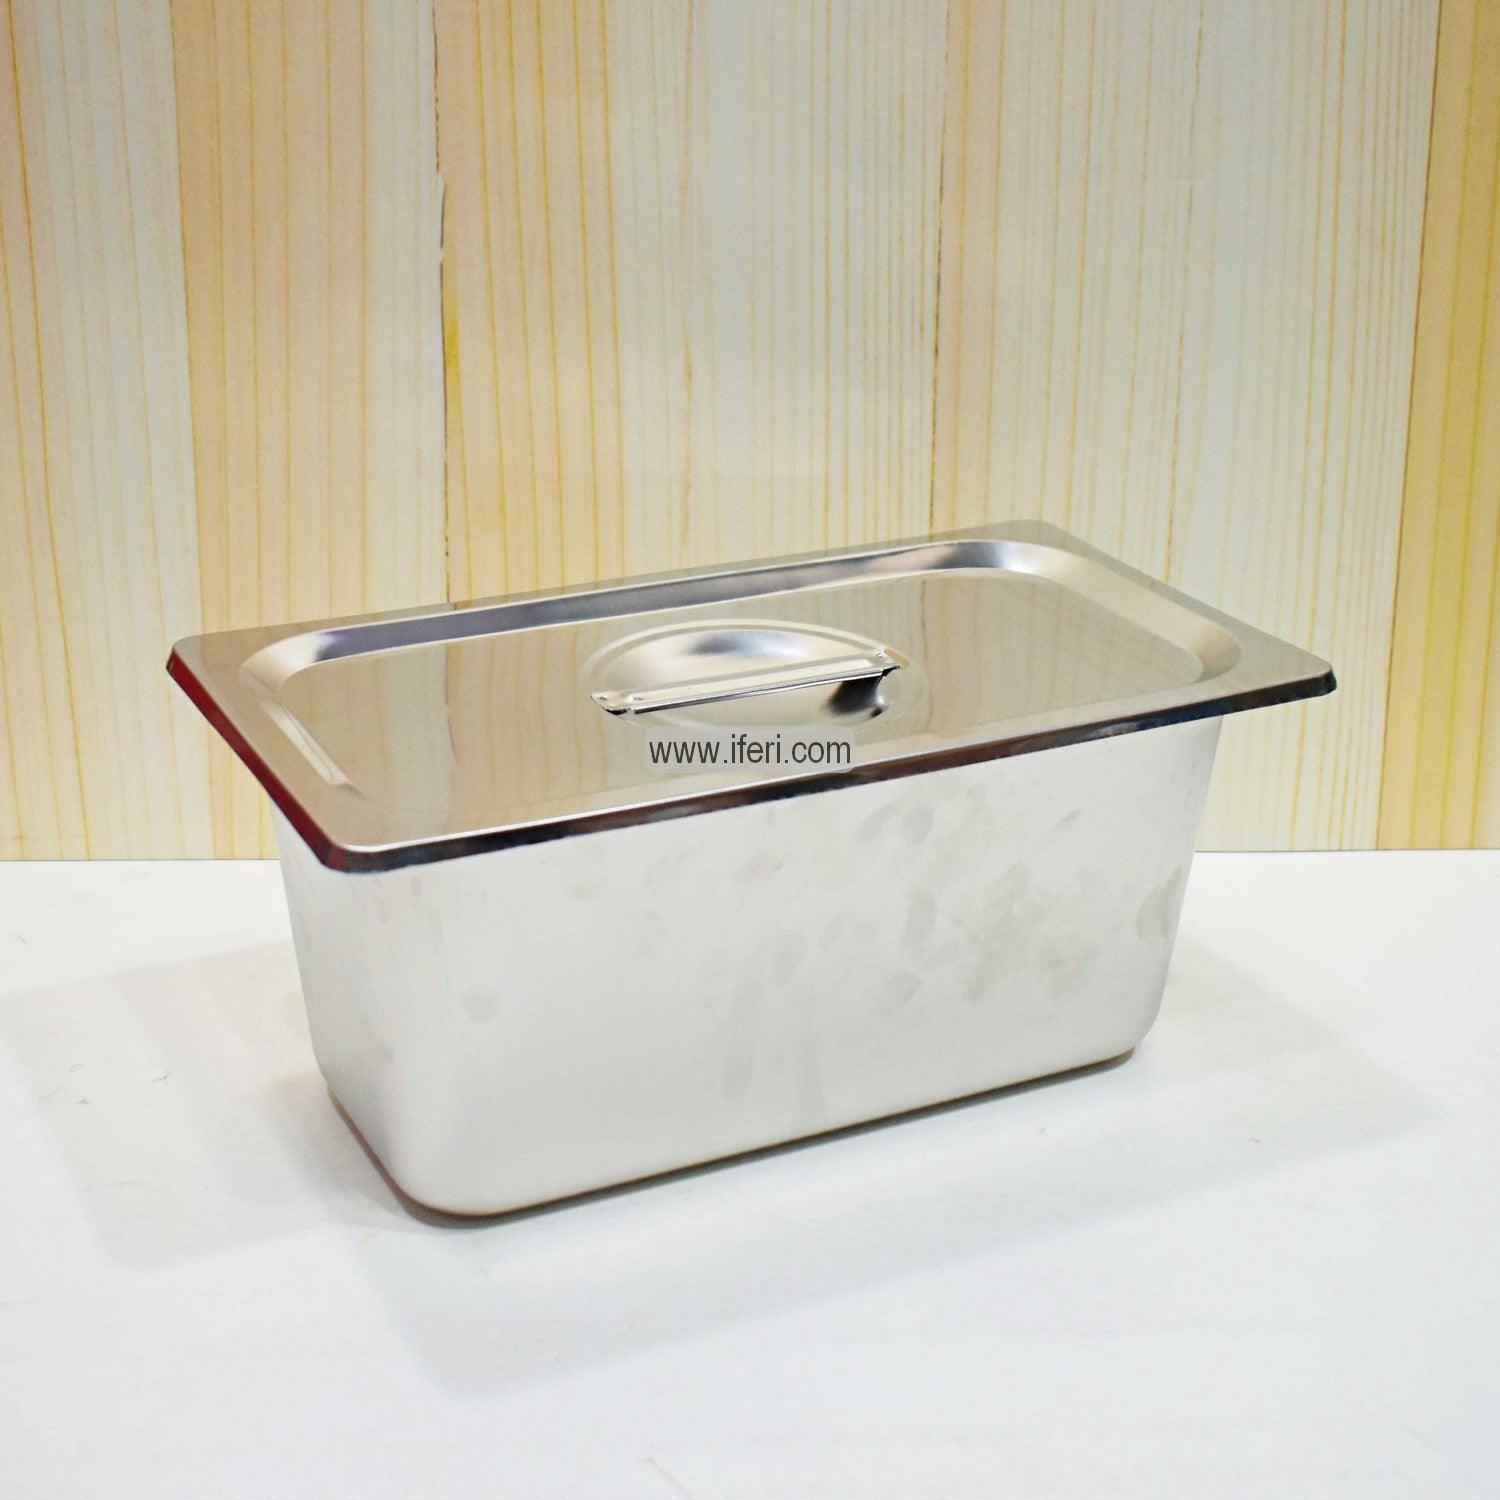 12.8 Inch Stainless Steel Food Pan with Lid SN0582 Price in Bangladesh - iferi.com